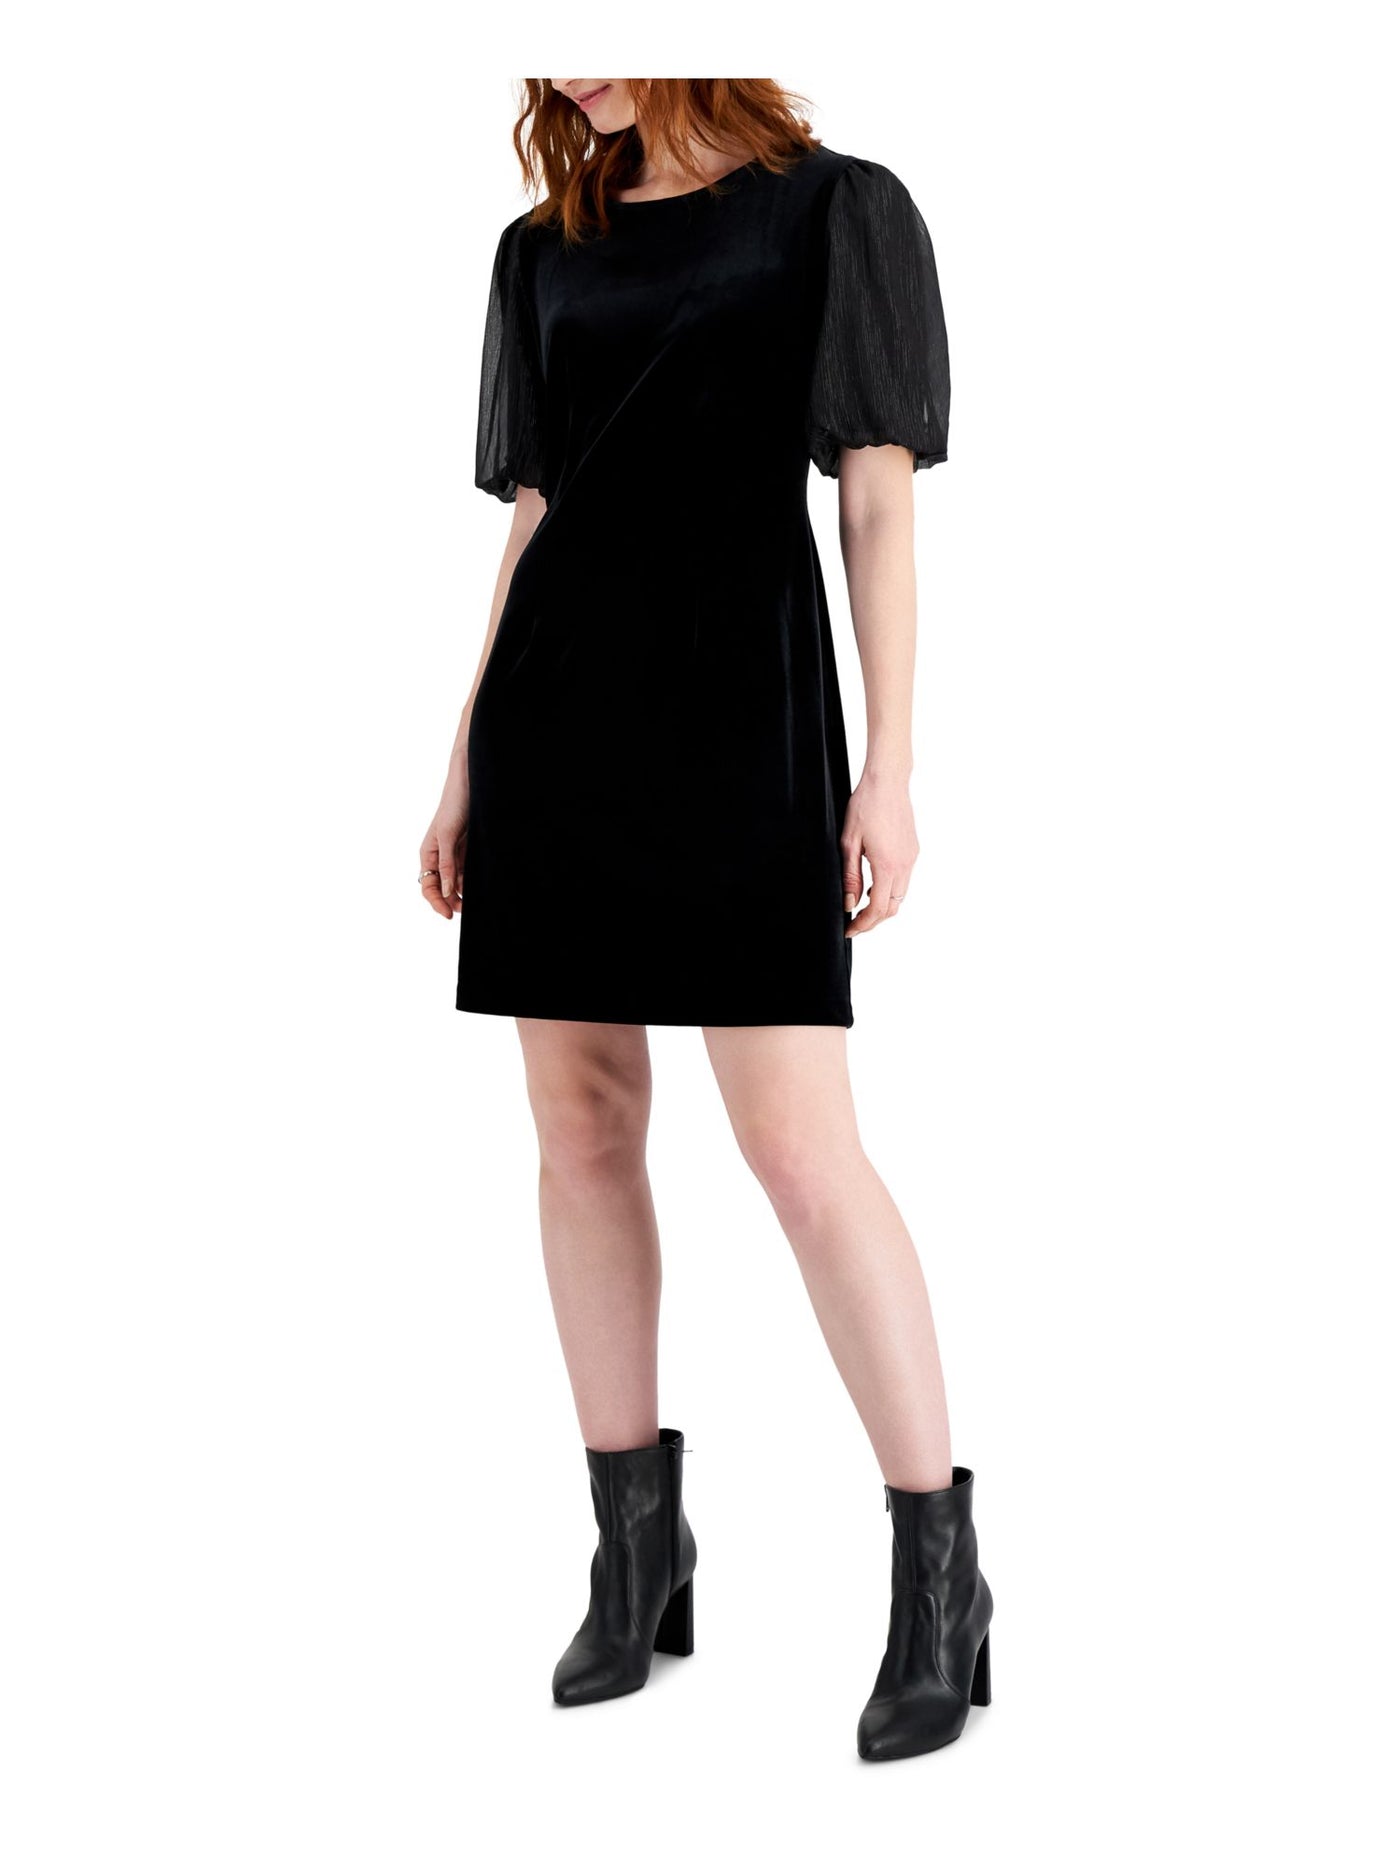 CONNECTED APPAREL Womens Black Textured Sheer Velvet Pull Over Pouf Sleeve Round Neck Above The Knee Party Sheath Dress Petites 14P